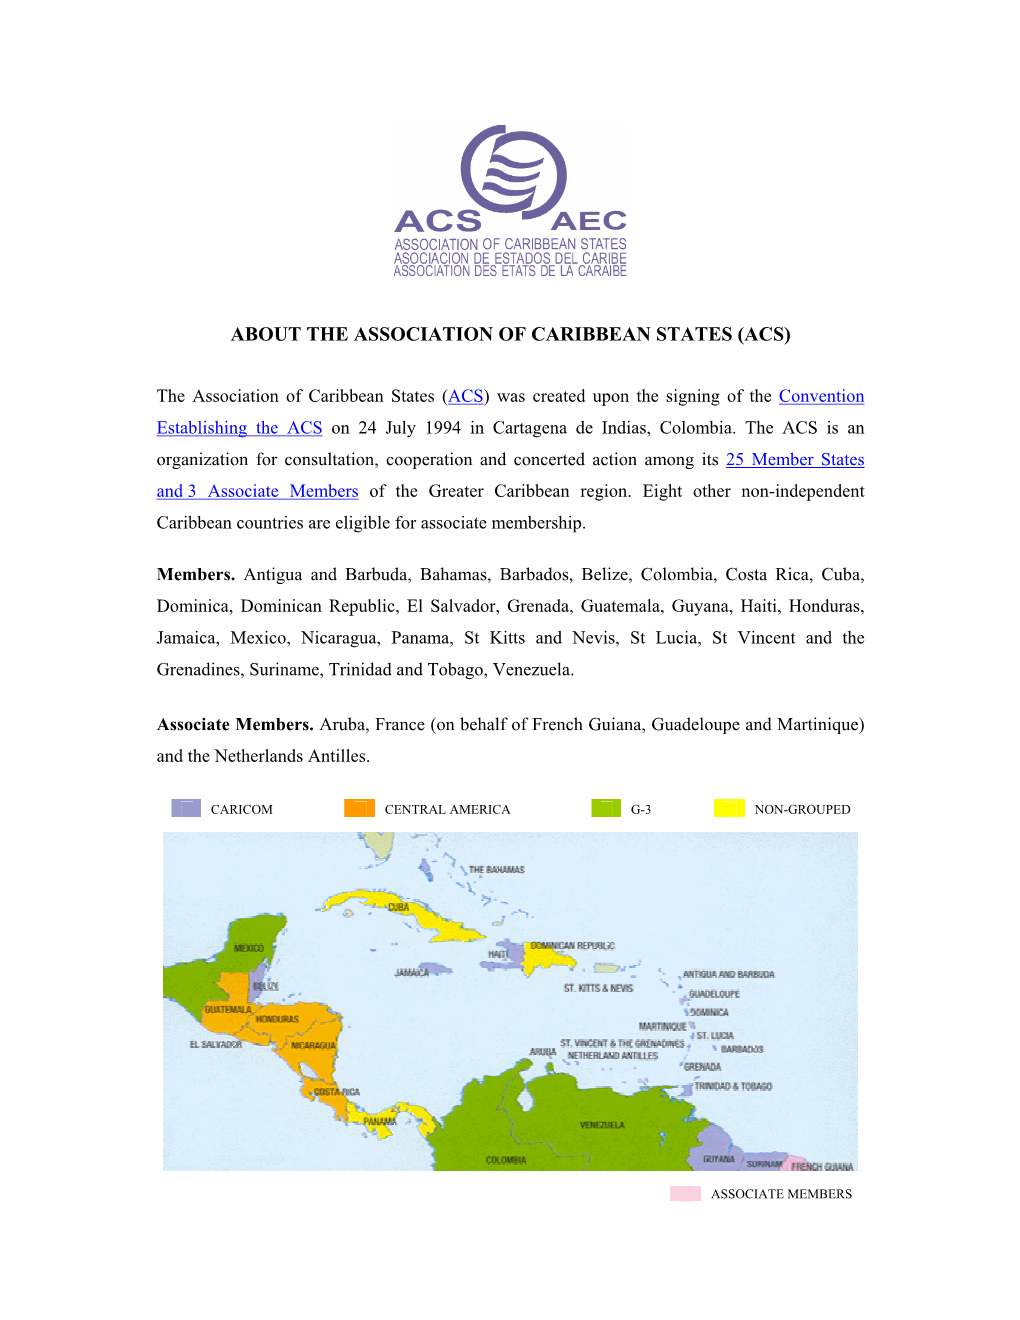 About the Association of Caribbean States (Acs)